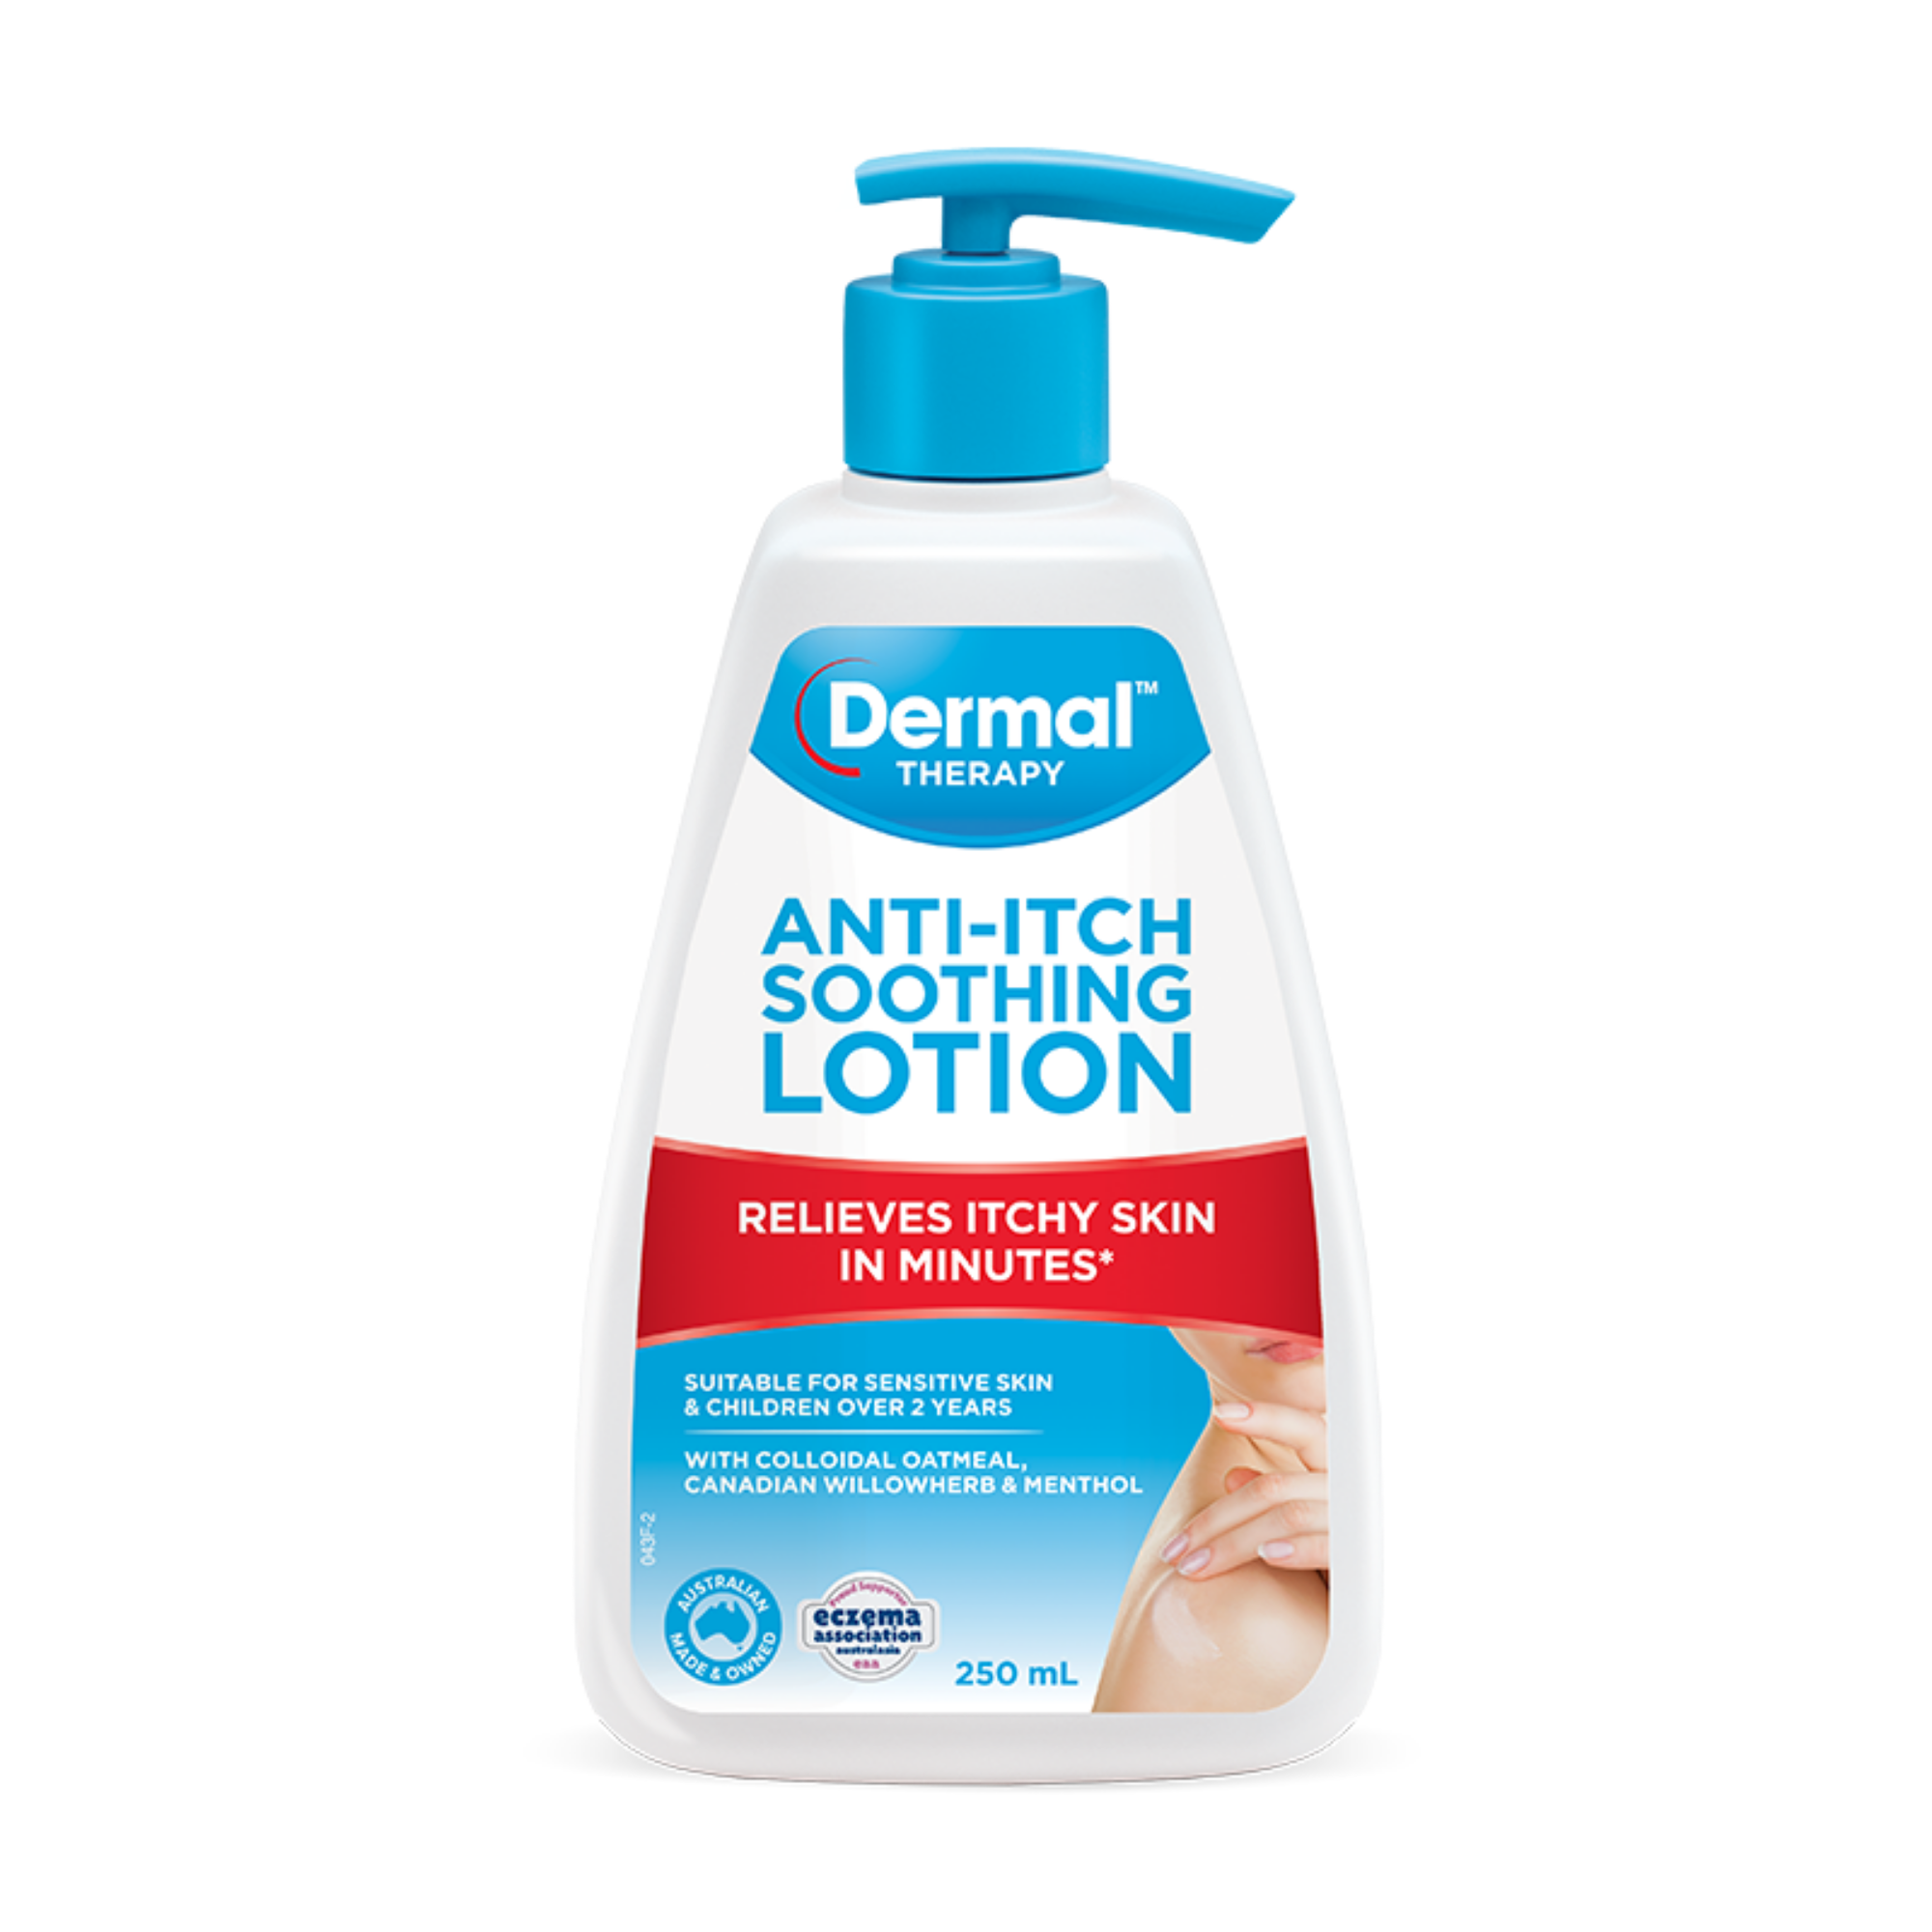 Dermal Therapy Anti-itch Soothing Lotion 250ml